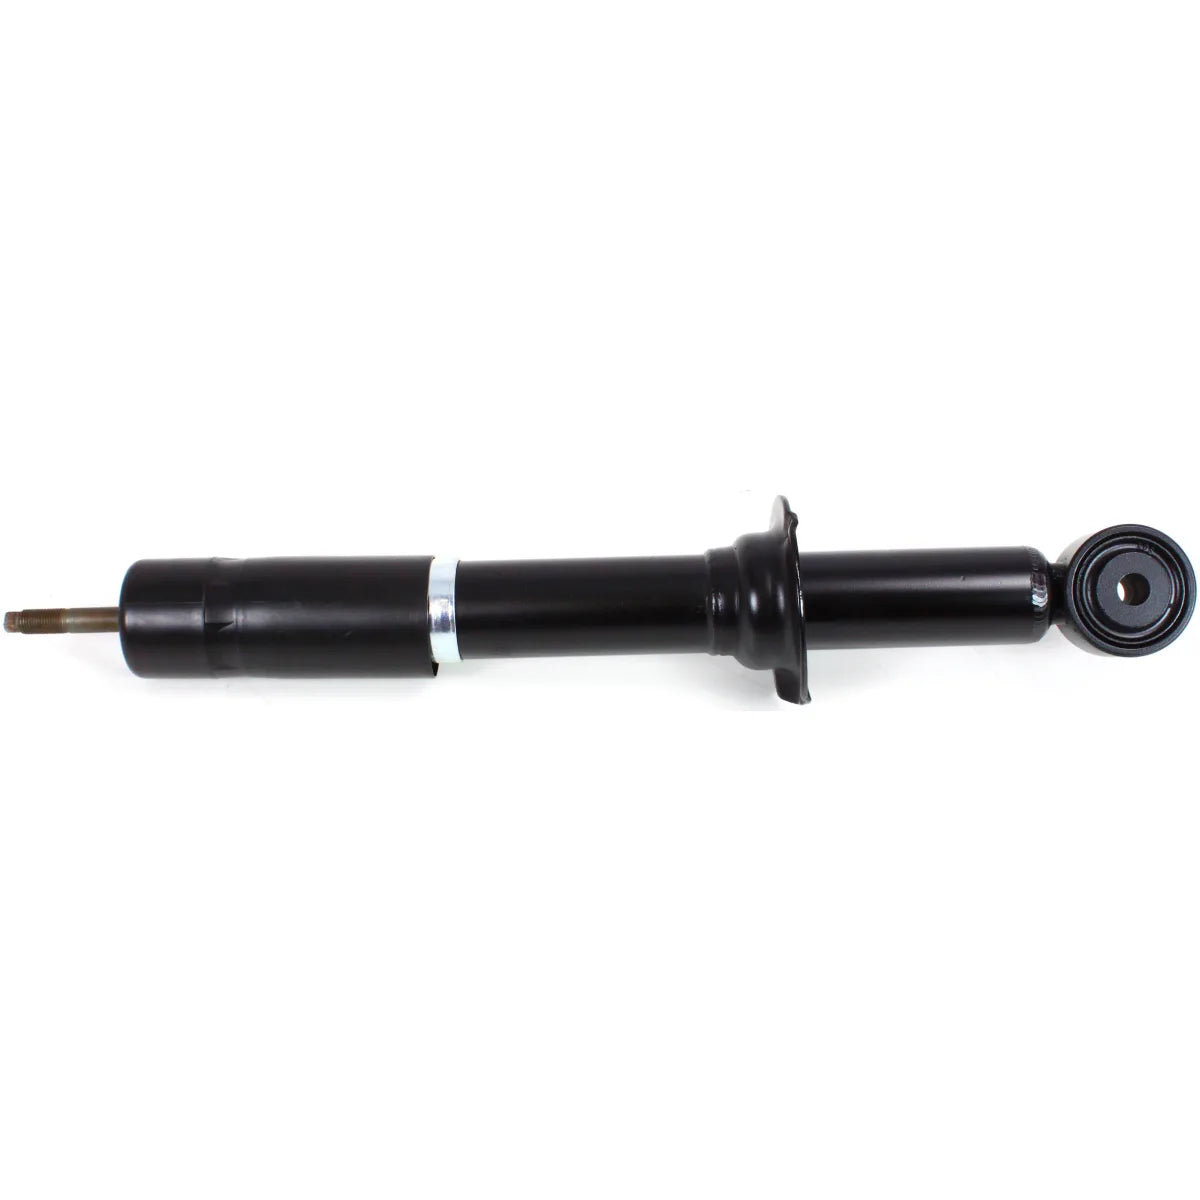 shock absorbers for 2003 tundra